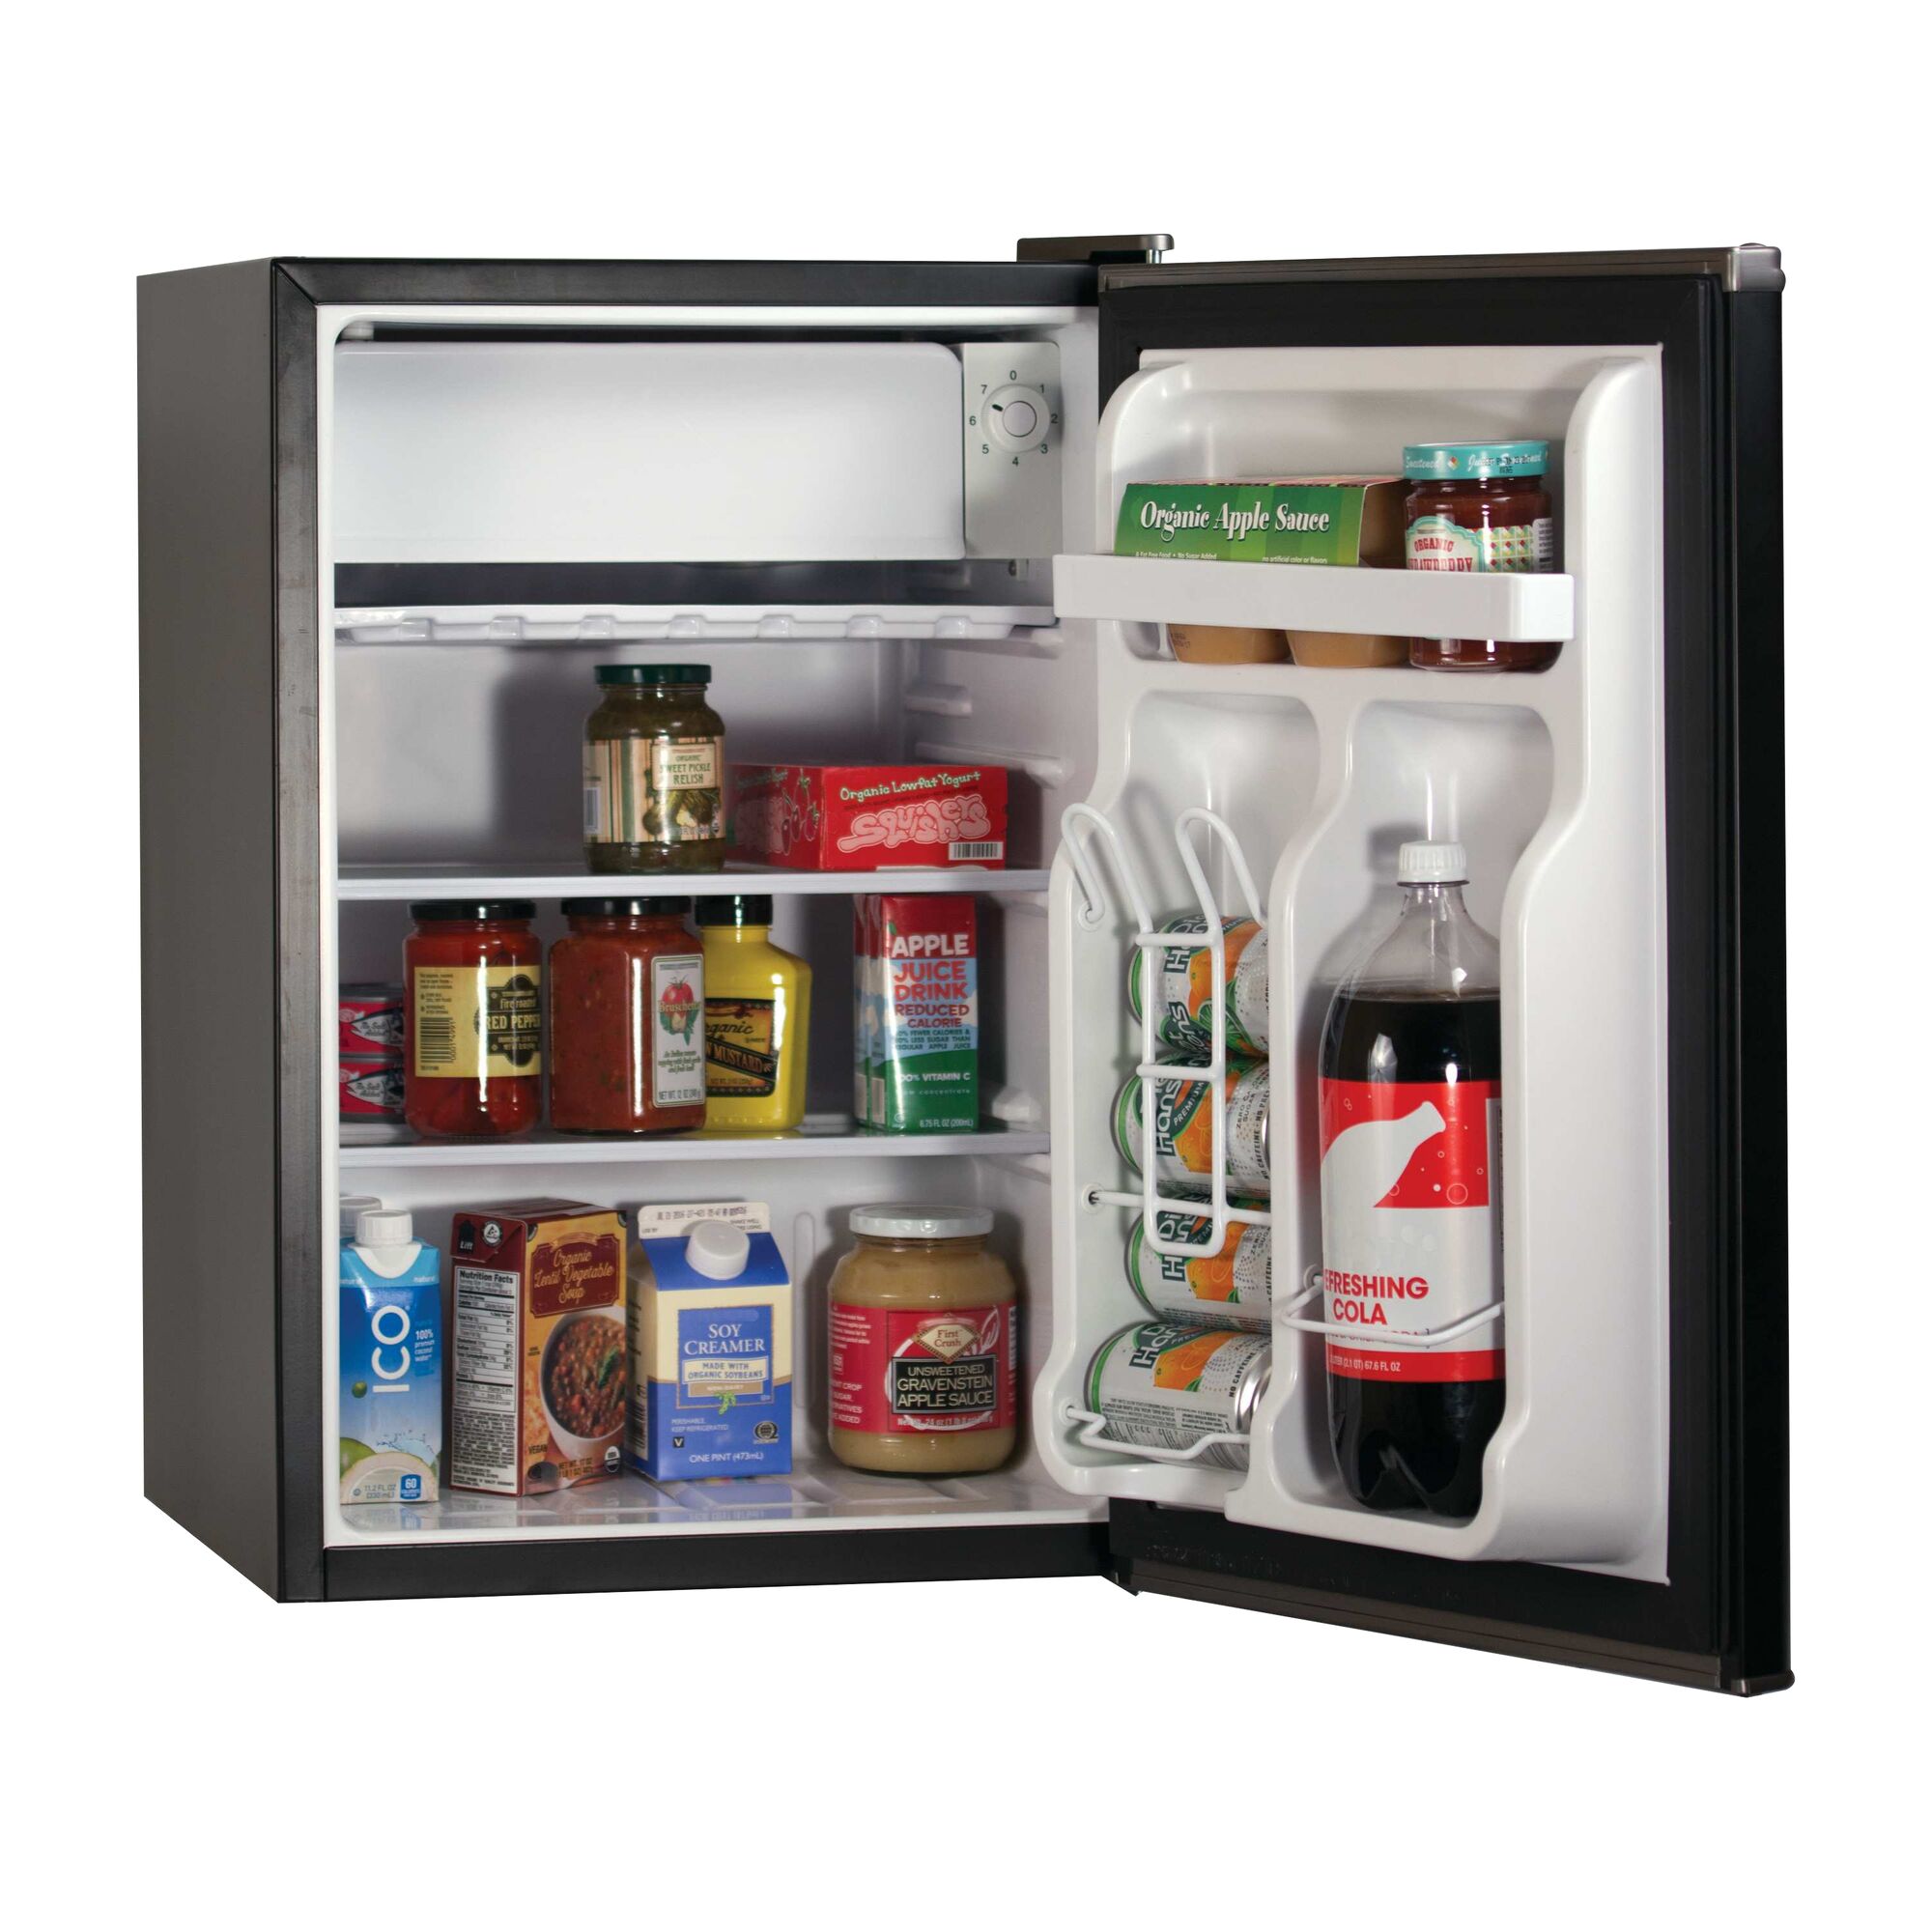 Profile of 2.5 cubic feet energy star refrigerator with freezer.